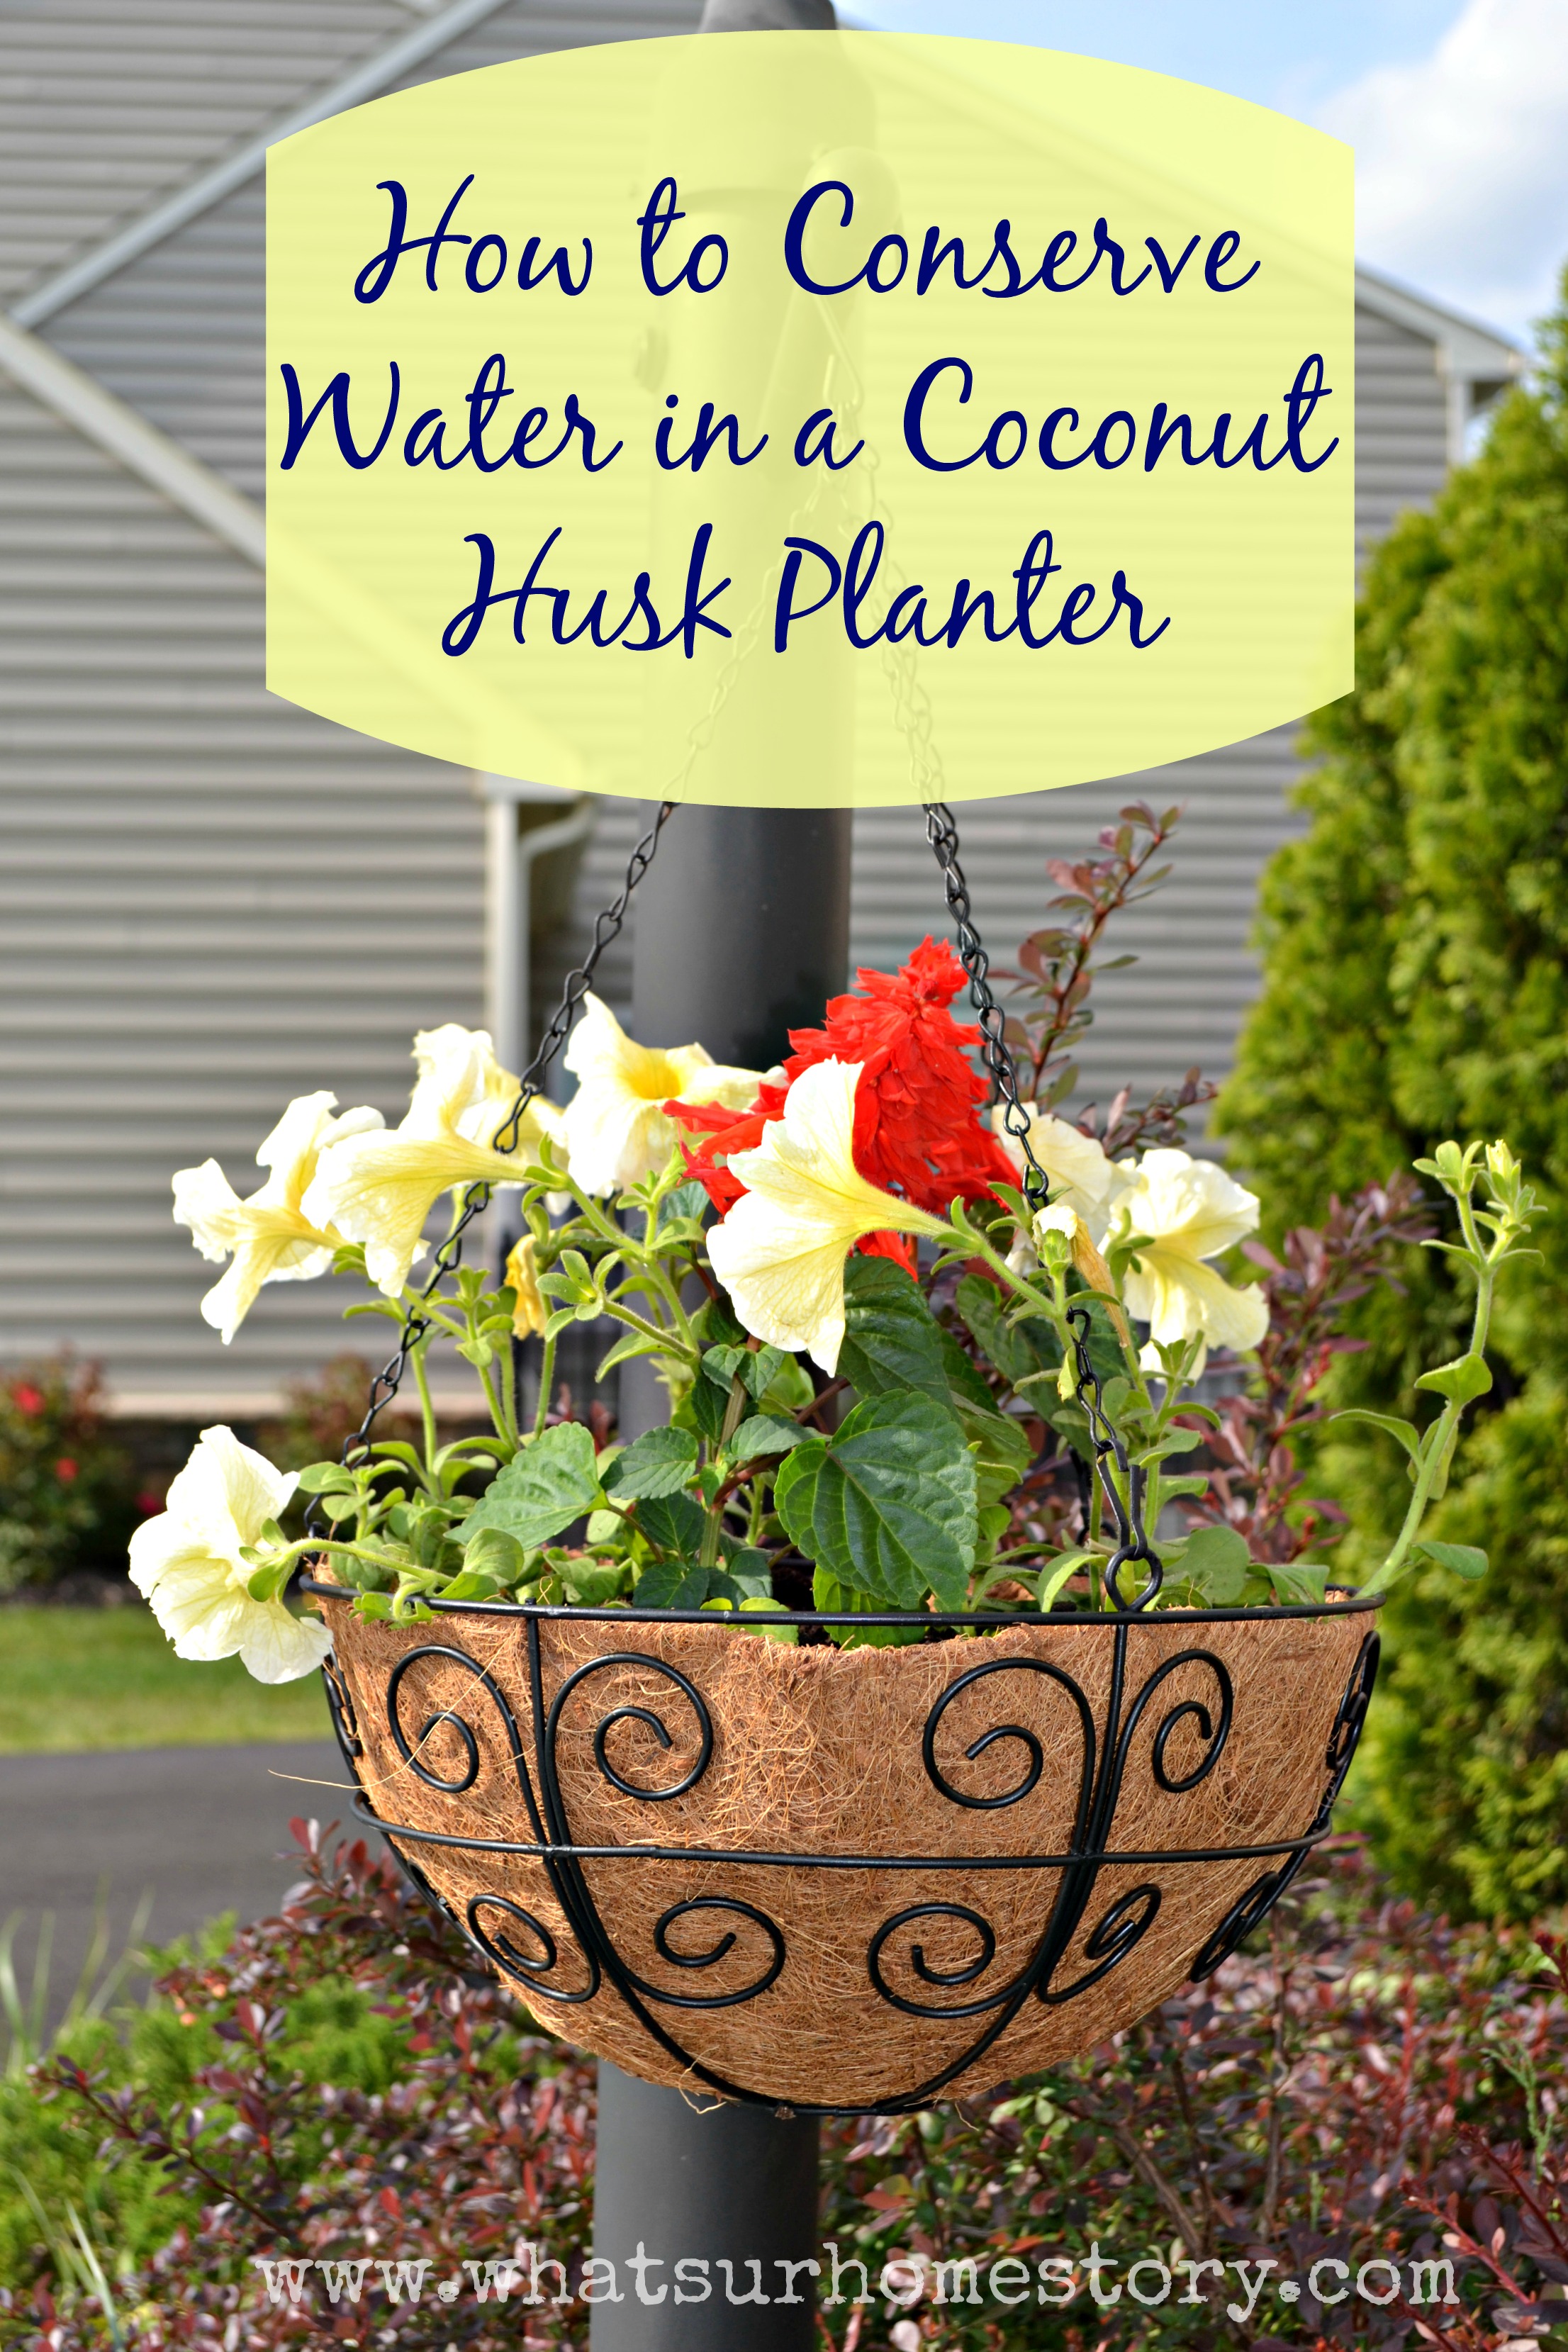 how to conserve water in a coconut husk planter